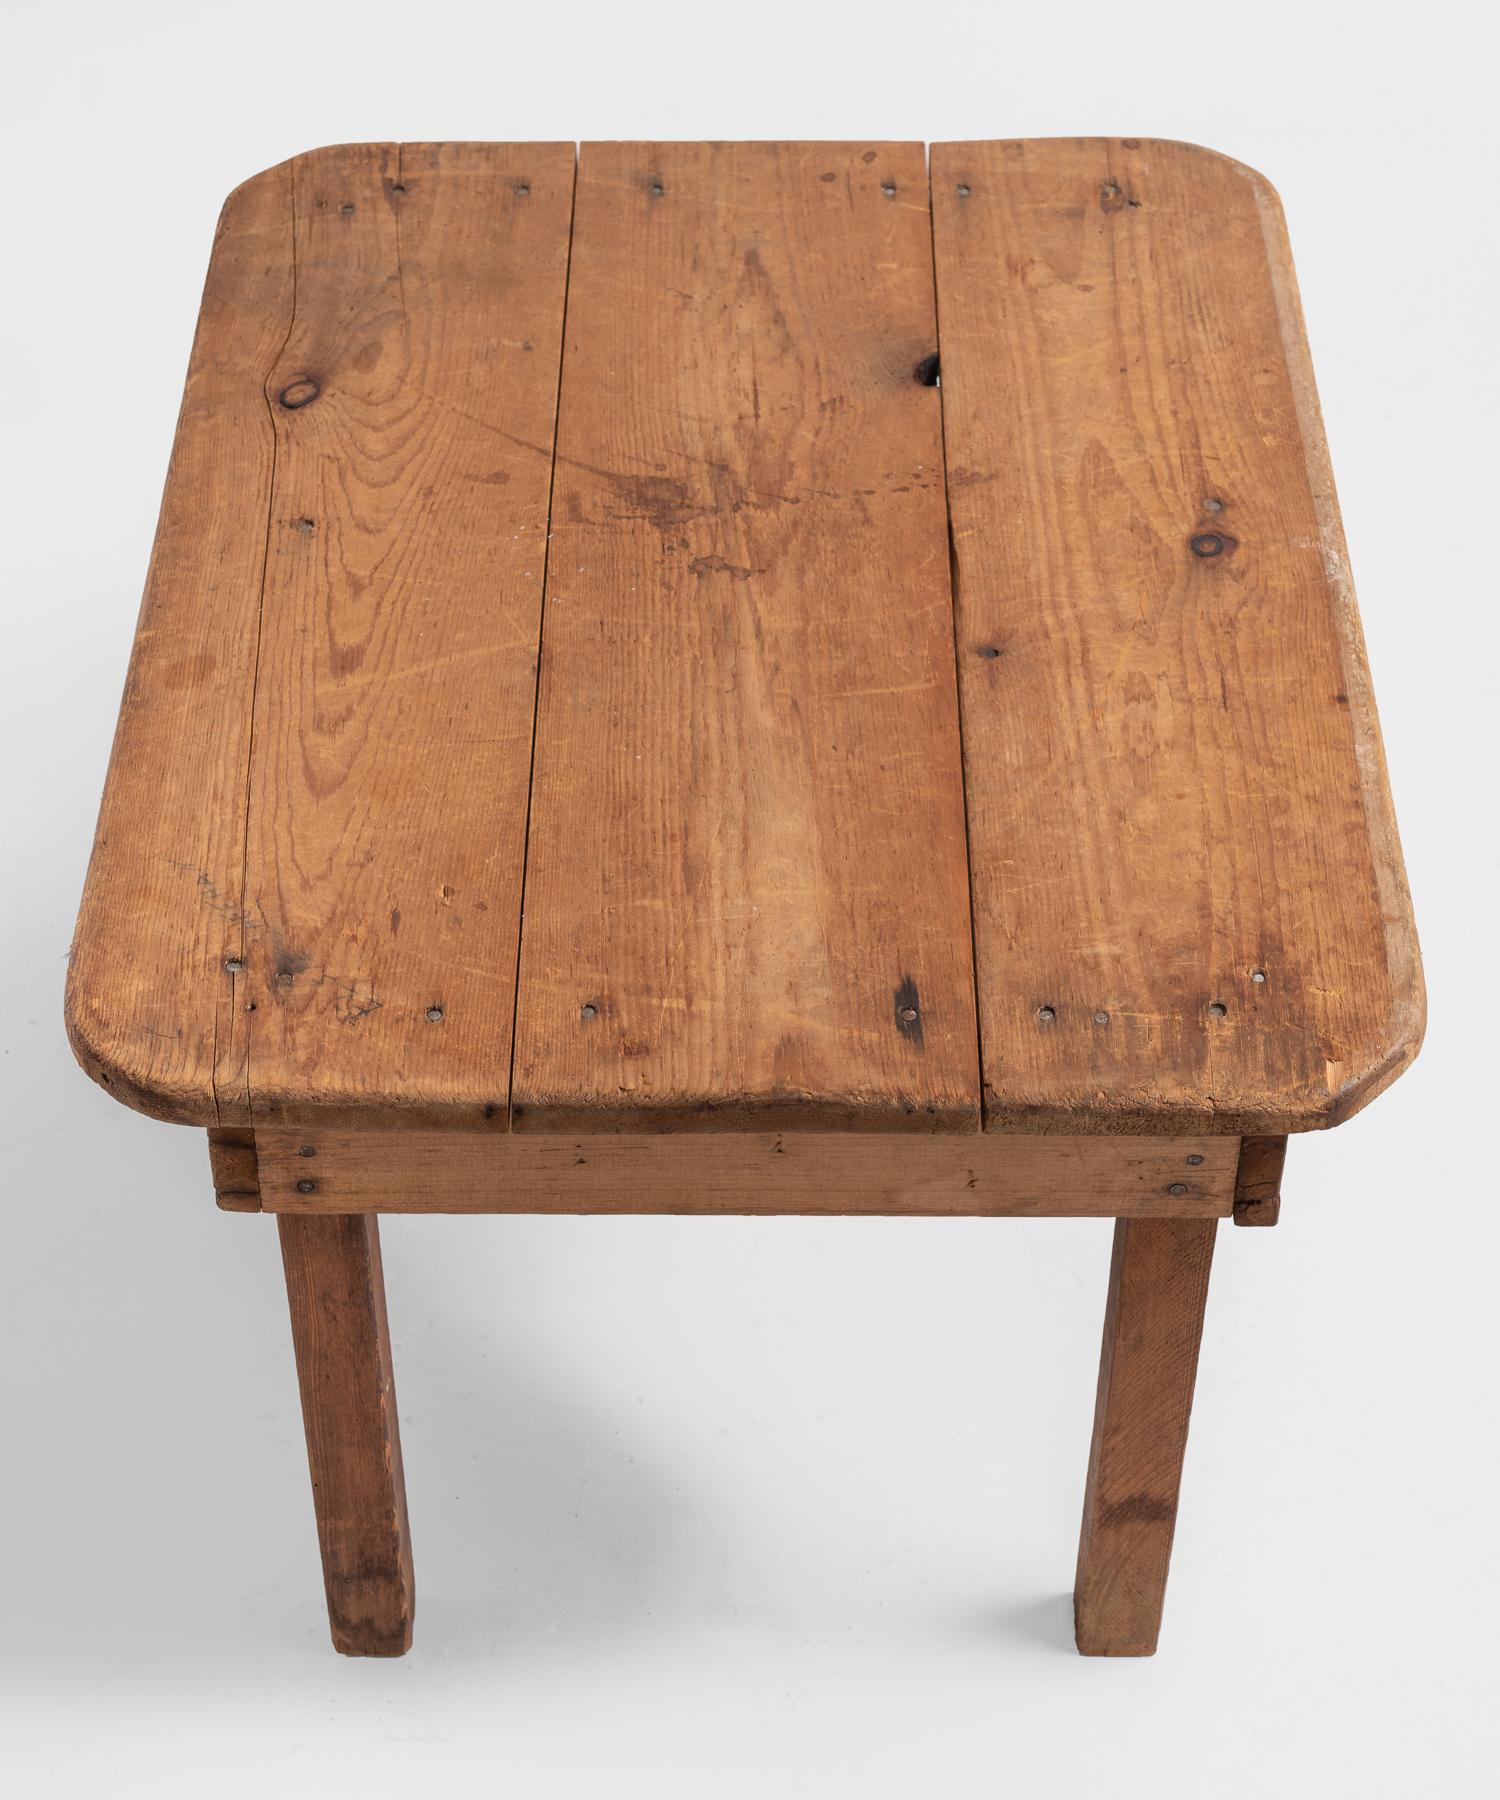 Hand-Crafted Primitive Pine Side Table, America, circa 1900